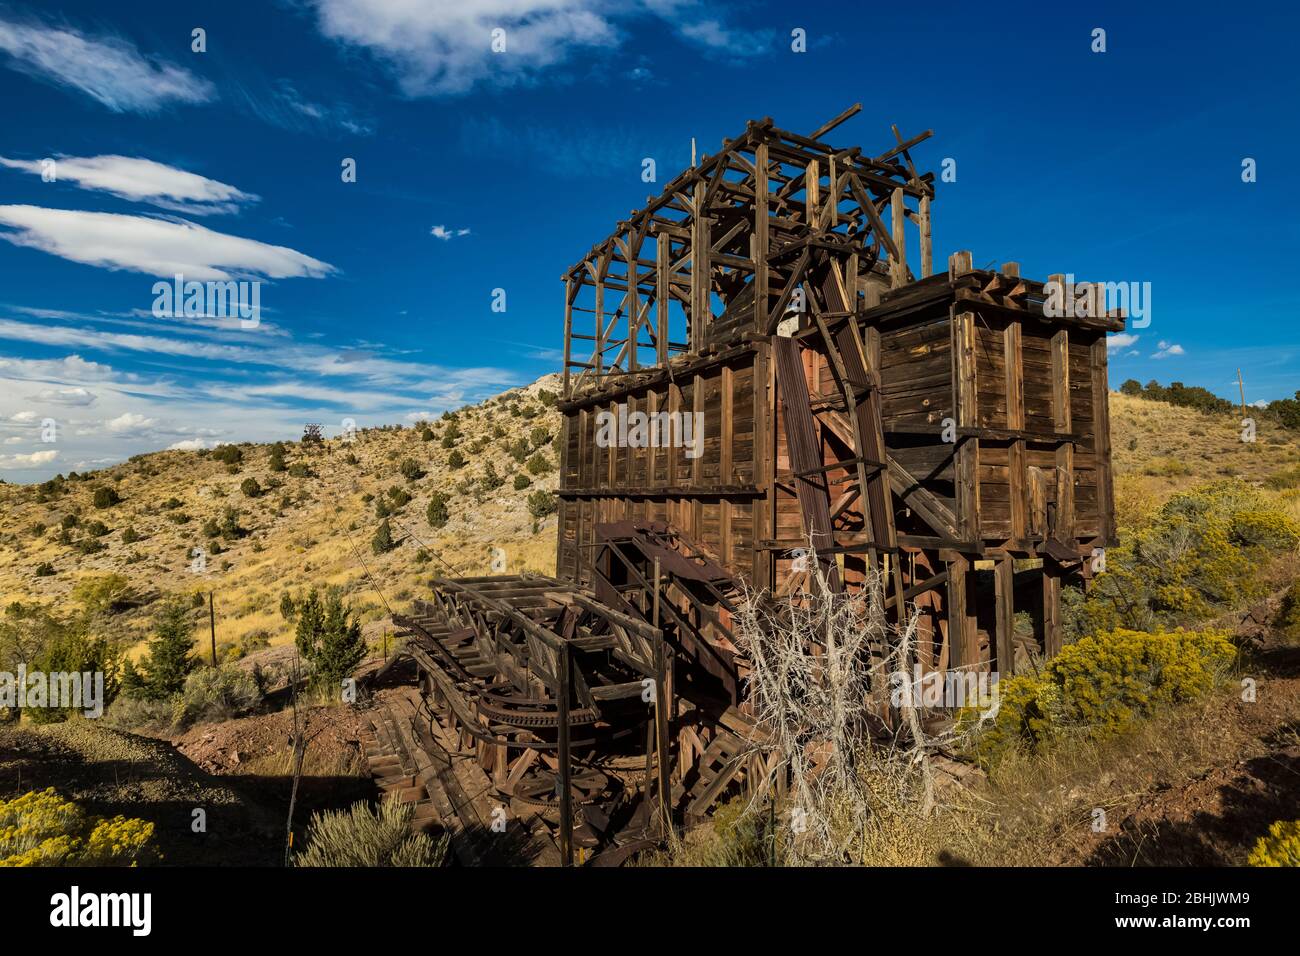 The Pioche Aerial Tramway transported silver ore from the mines to the Godbe Mill in the 1920s and 1930s, Pioche, Nevada, USA Stock Photo